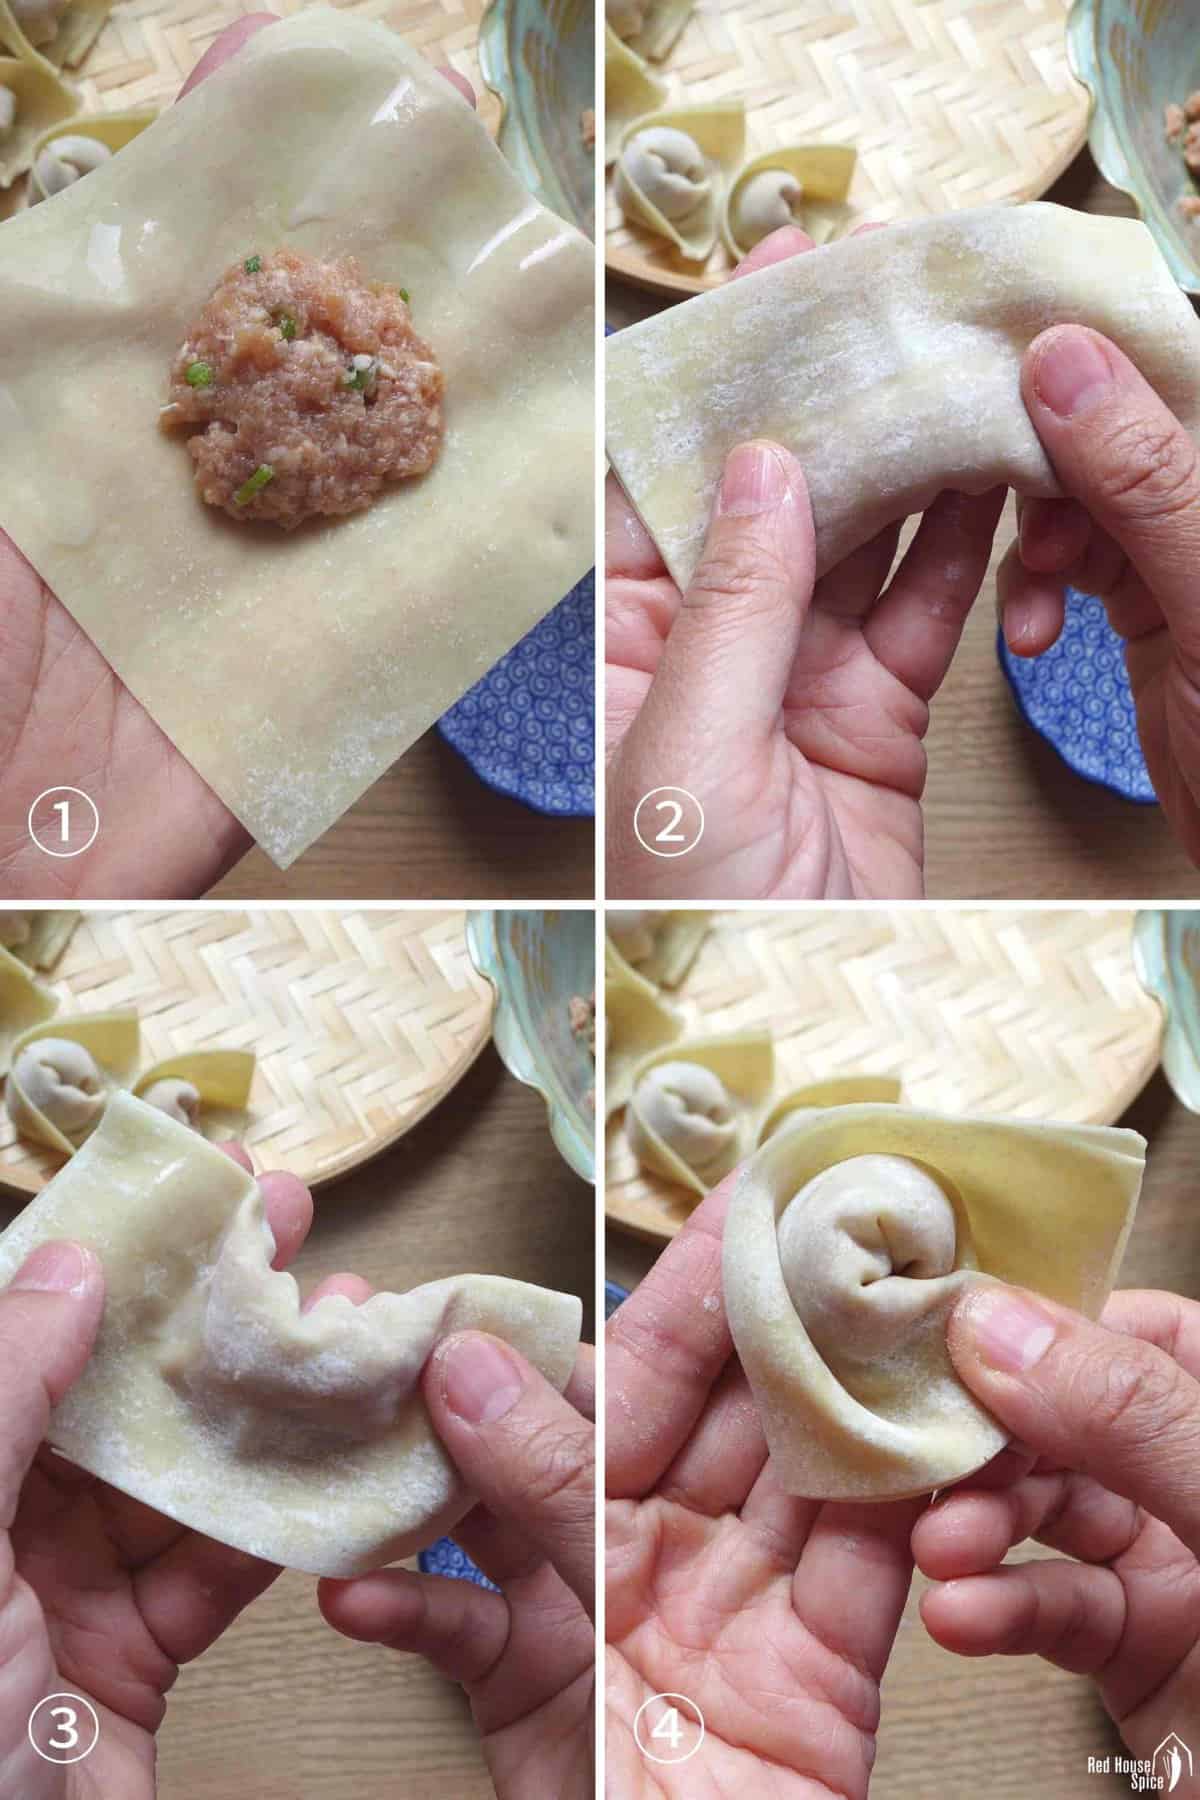 A collage of photos showing the process of folding a wonton.